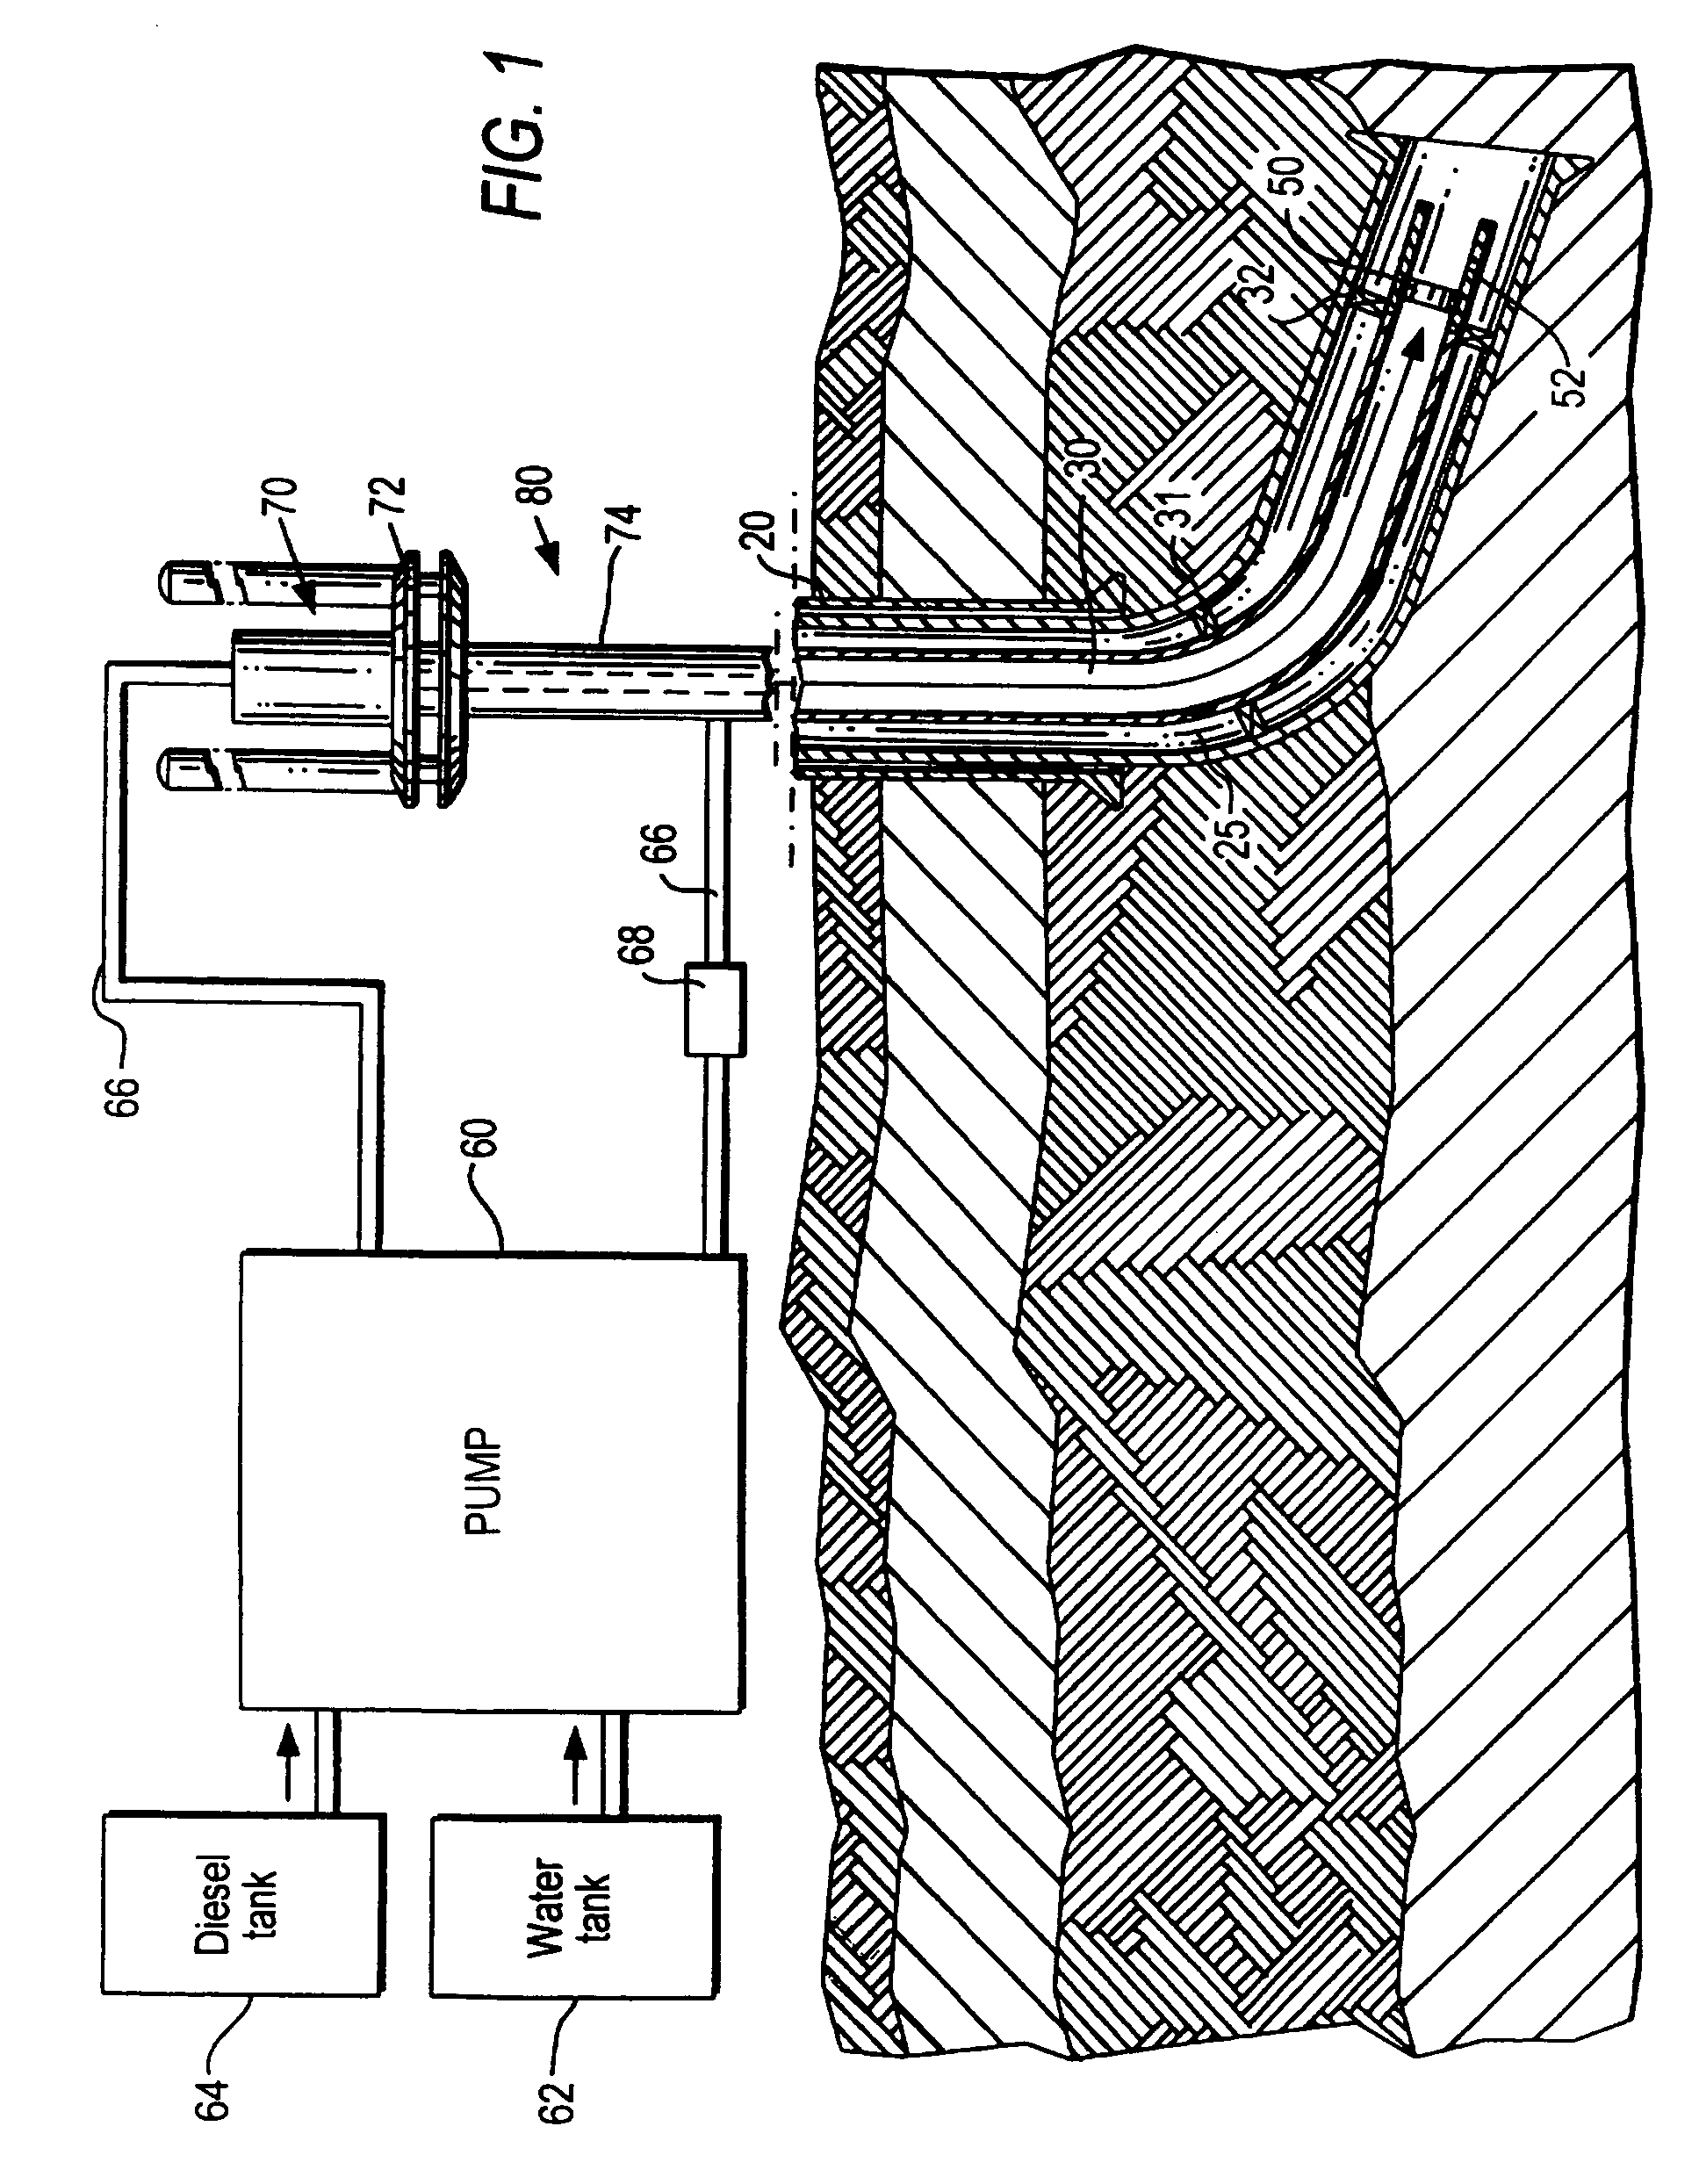 Method for hydraulic rupturing of downhole glass disc